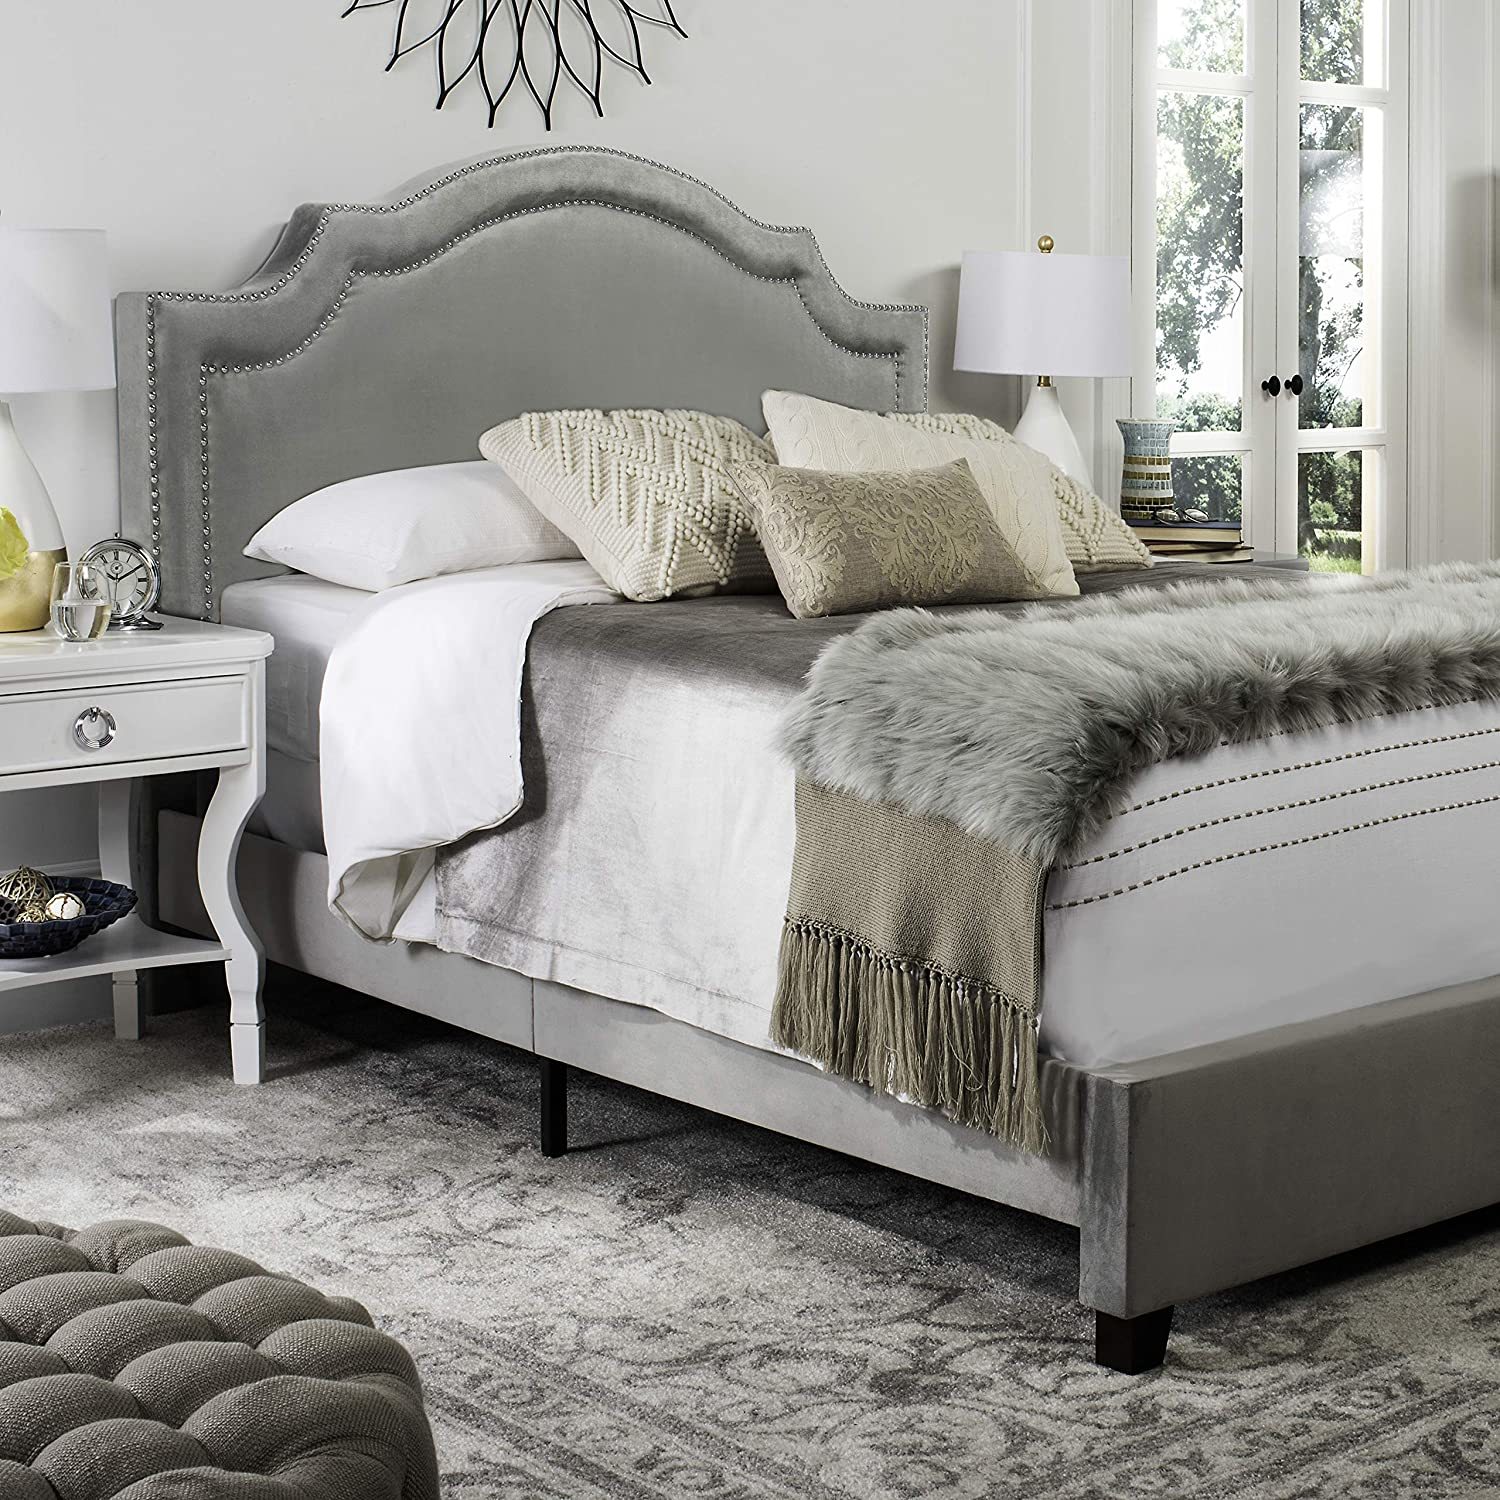 Theron Full Bed In Pewter Velvet With Nickel Nailhead Trim From Safavieh Home - $527.99